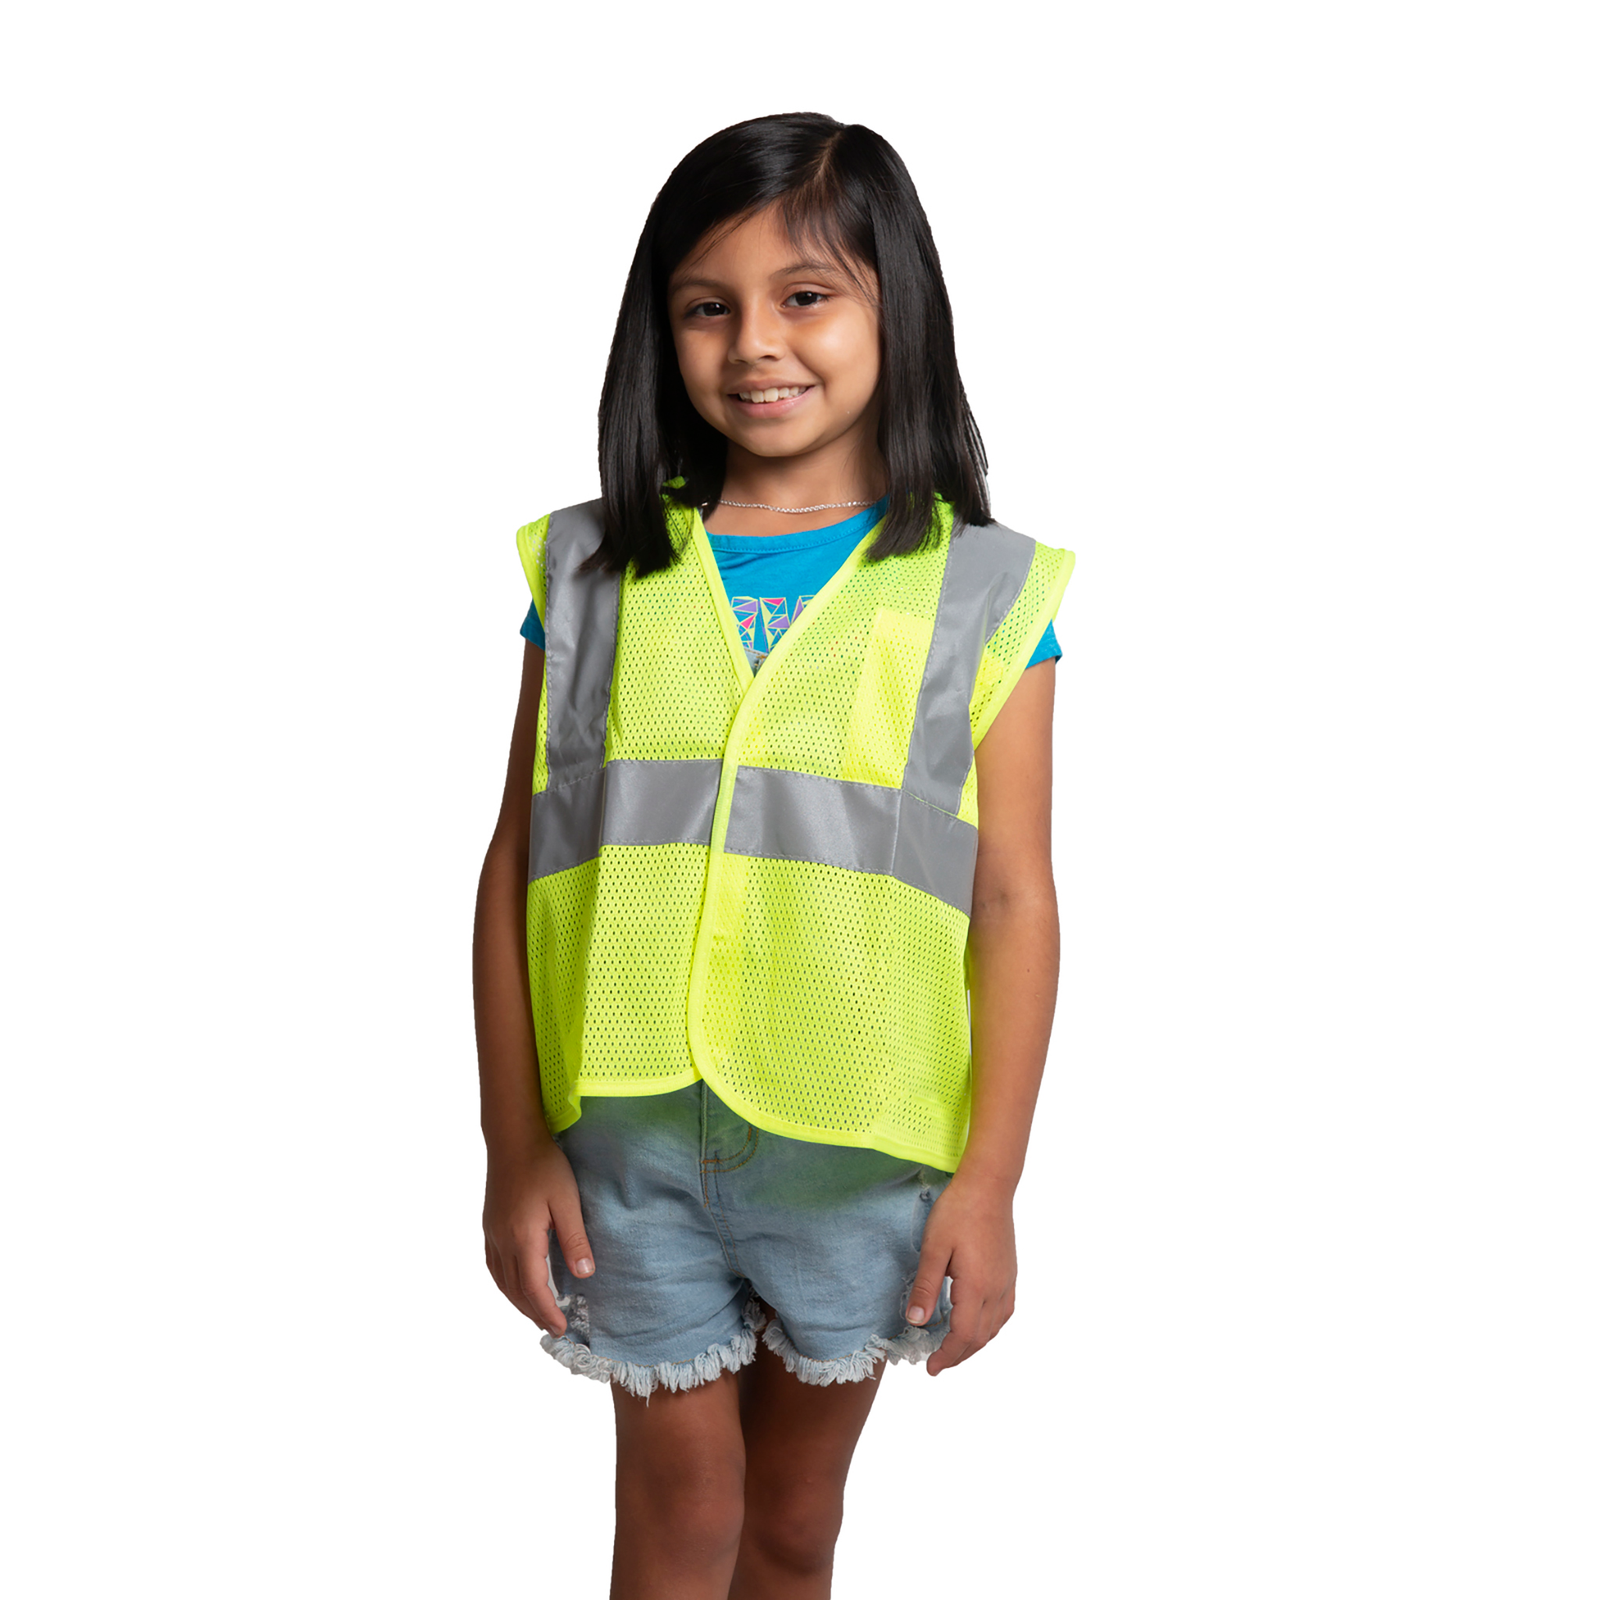 5 year old girl wearing a lime yellow safety vest with reflective strips for school